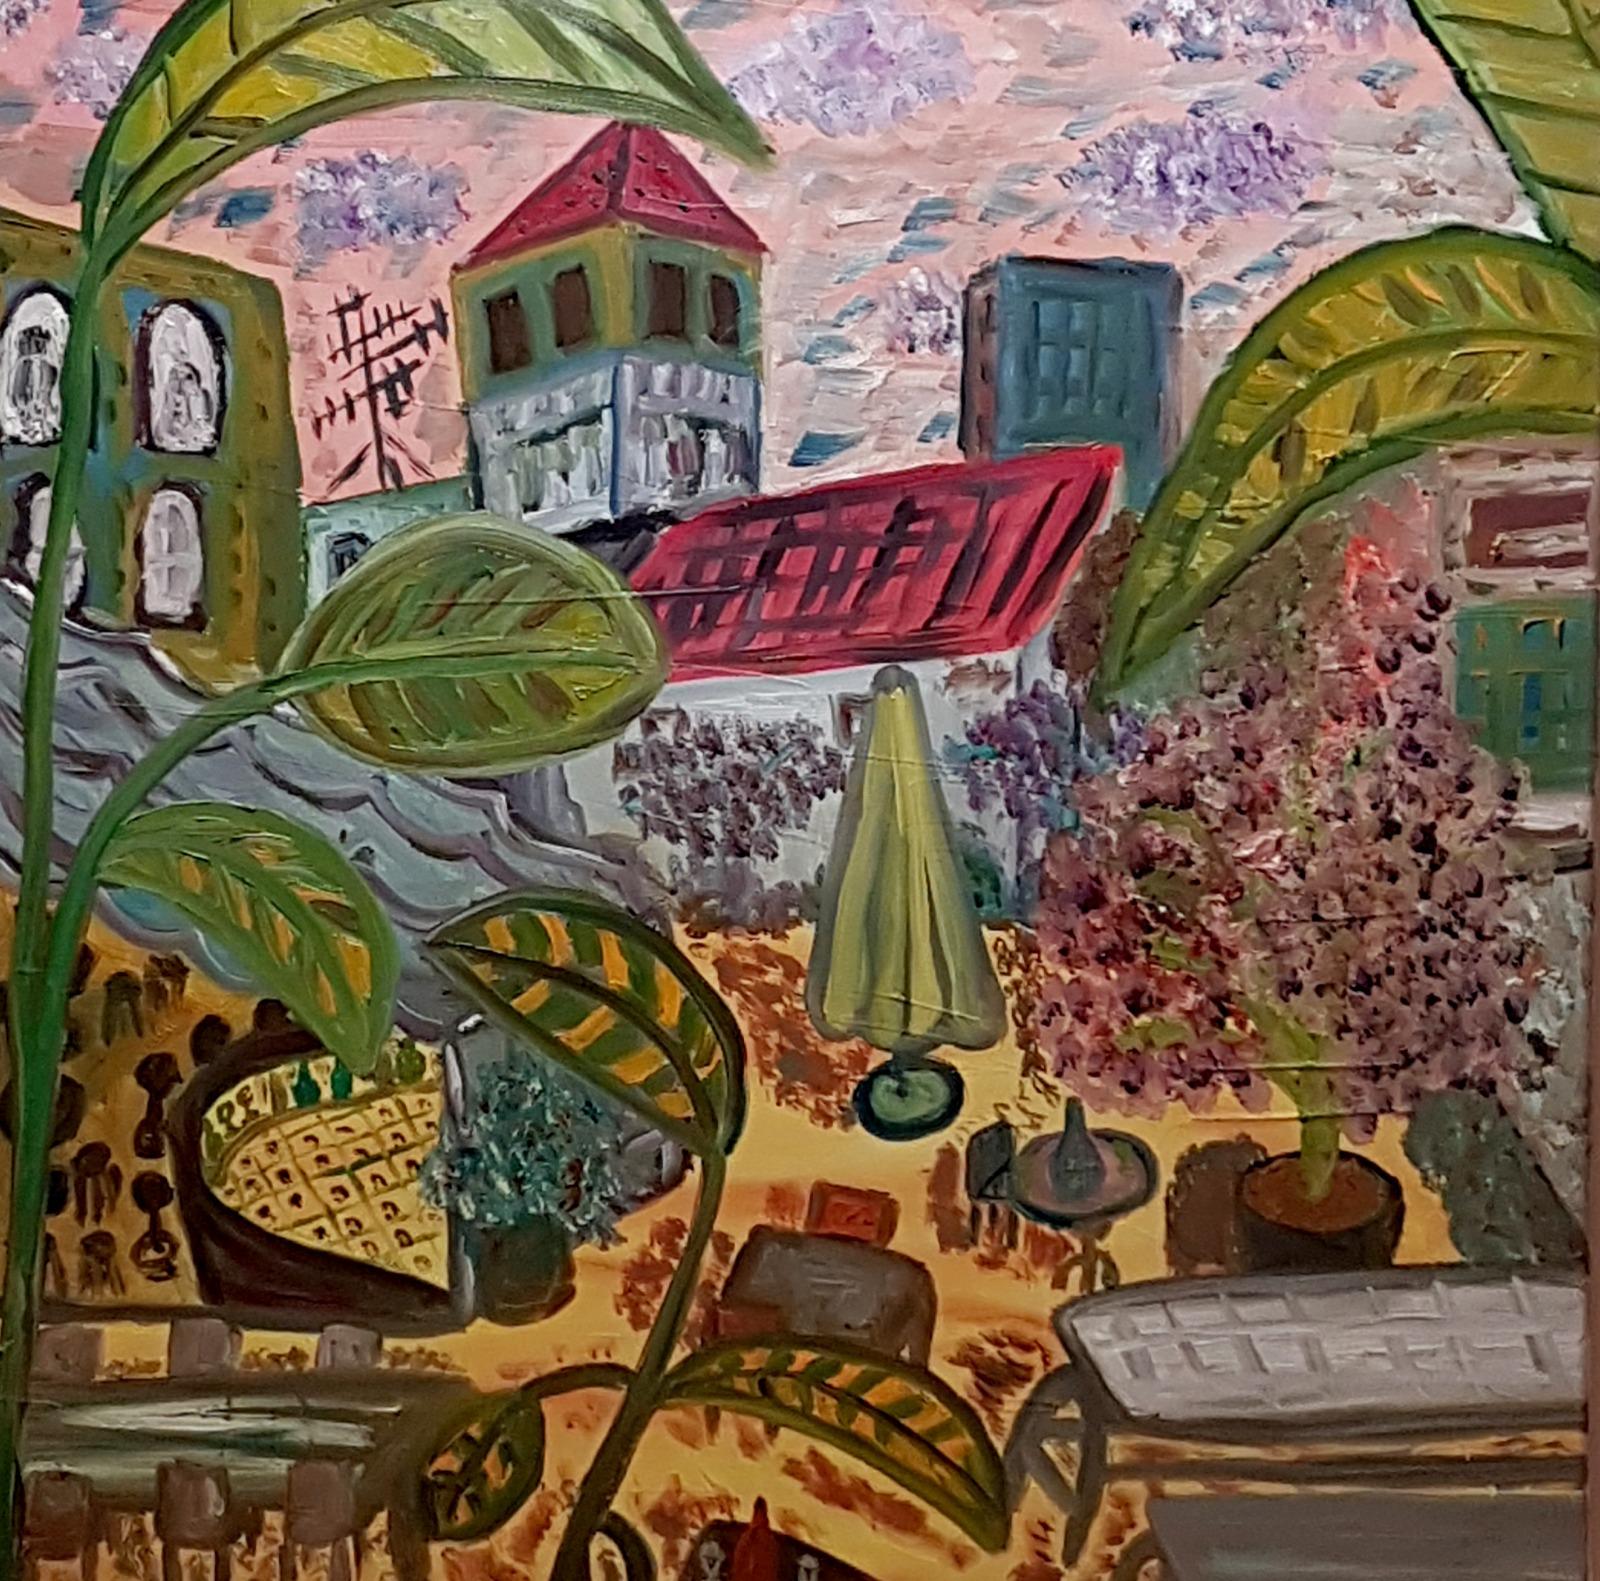 Oil on canvas 

Dondi Schwartz is an Israeli artist born in Canada in 1961 who lives and works in the Kibbutz Beeri, Negev, Israel. Schwartz studied art at the Avni School of Arts in Tel Aviv, The Kibbutz Workshop for Painting and Creative Writing